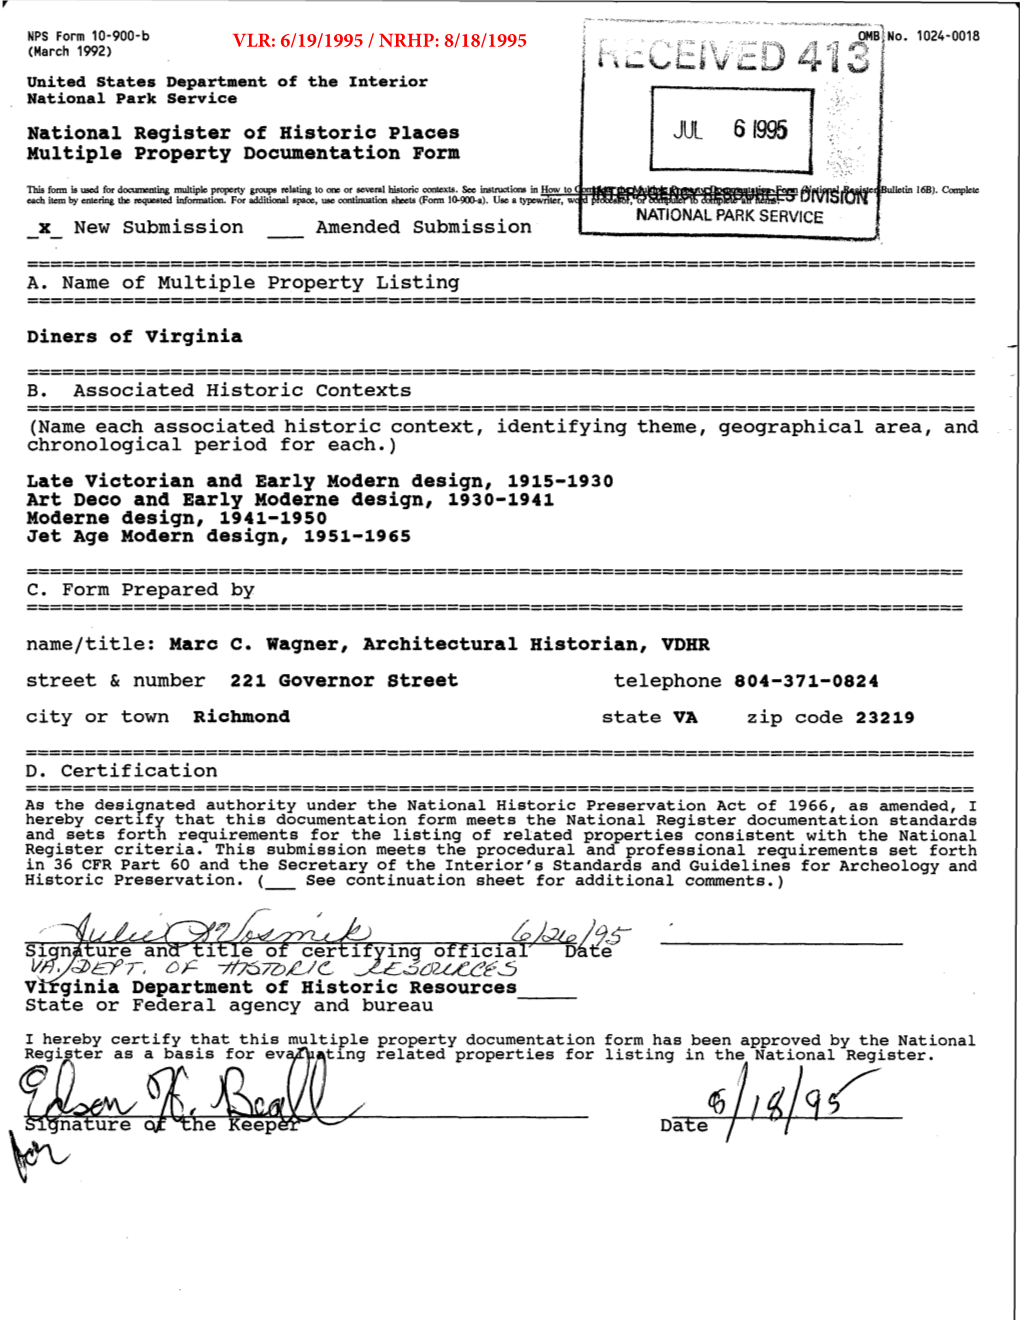 Ti~· F United States Department of the Interior National Park Service National Register of Historic Places JUL 61995 Multiple Property Documentation Form